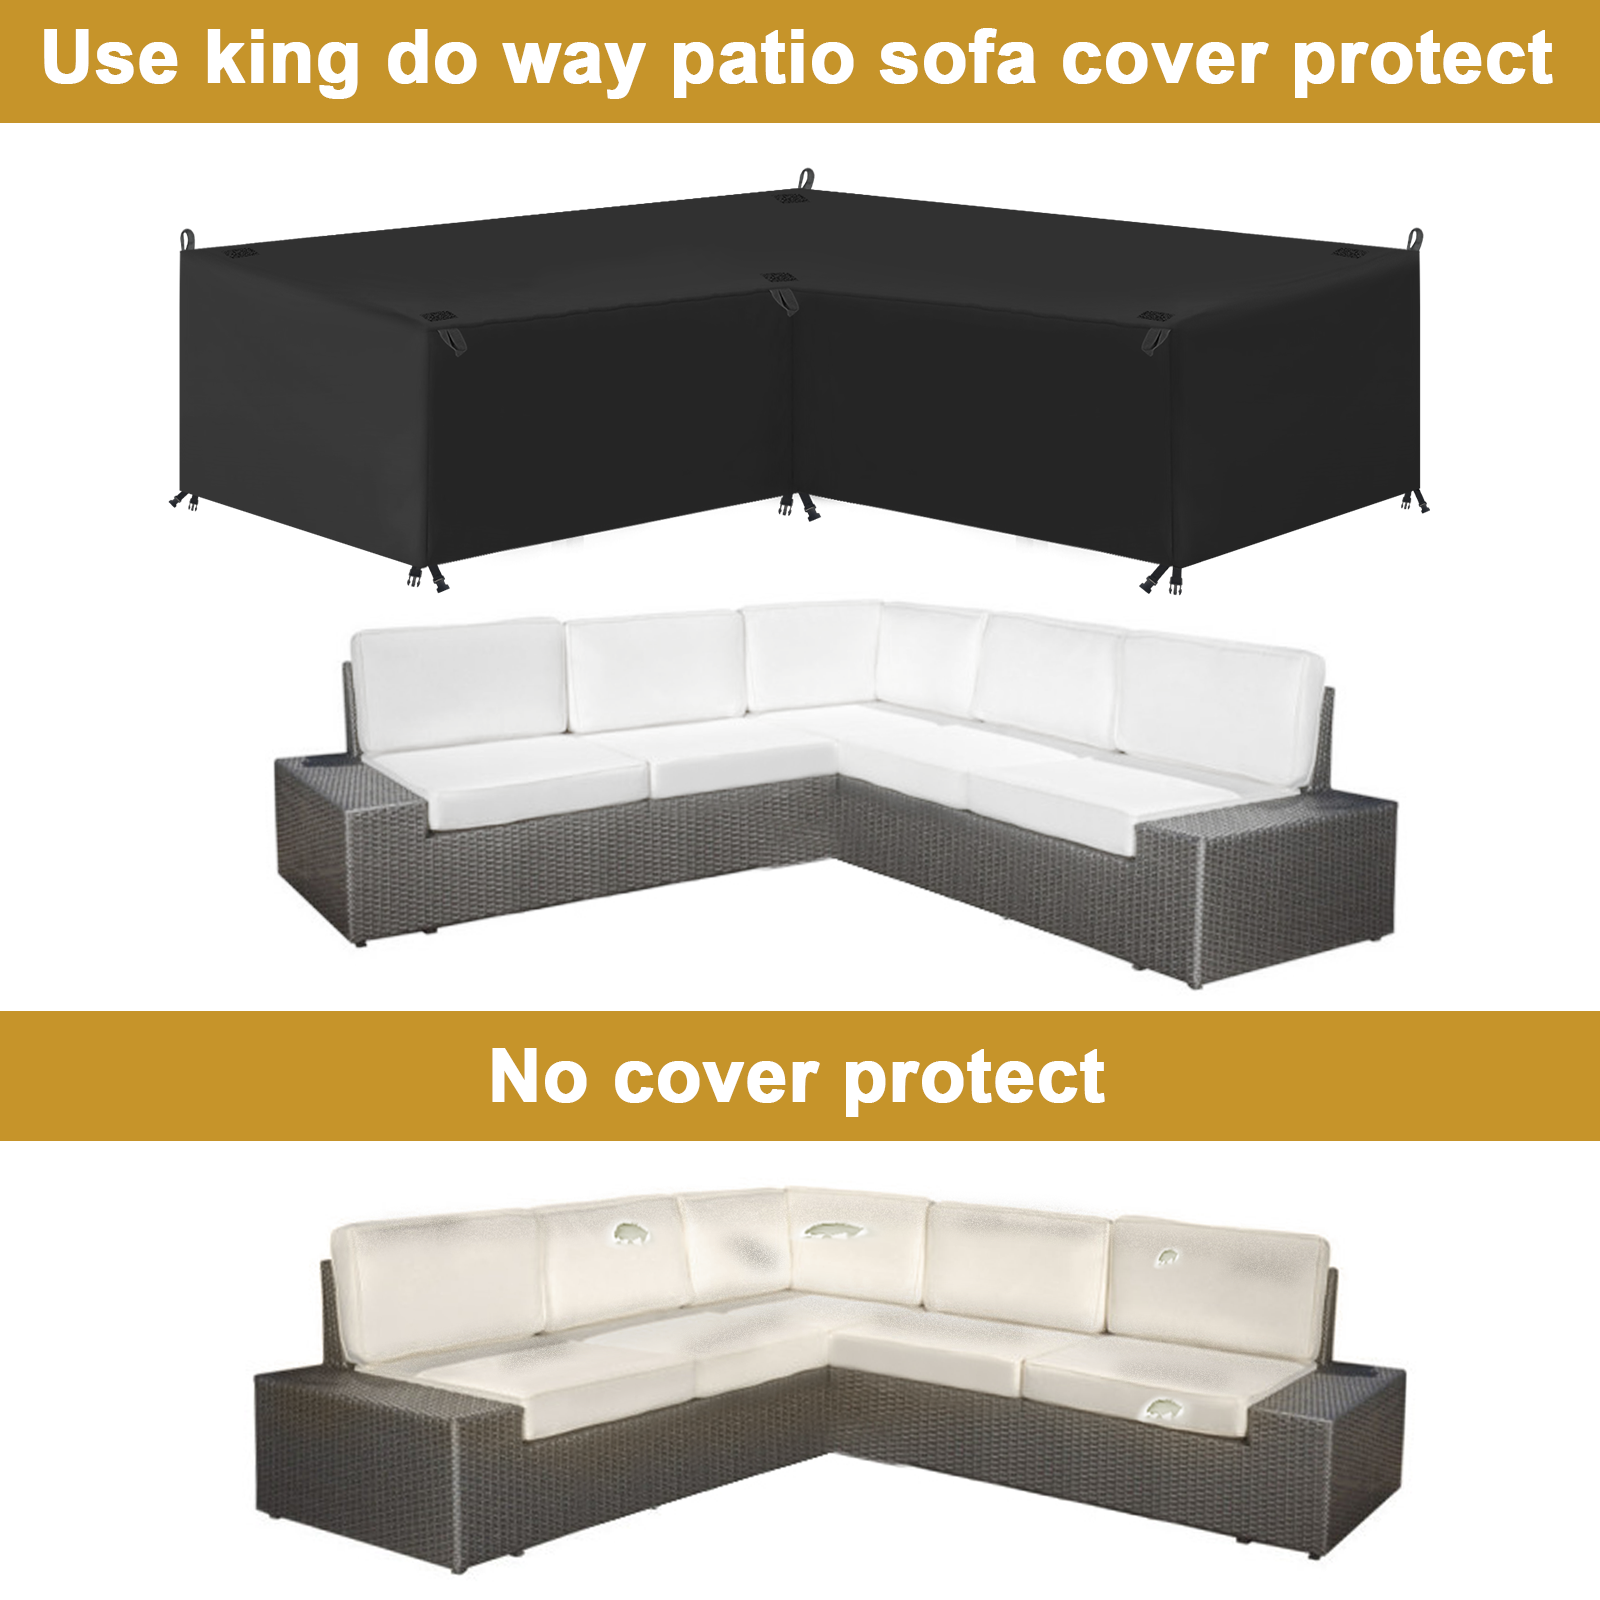 KING-DO-WAY-Waterproof-Patio-Sofa-Cover-UV-resistant-Snow-Protection-Tear-resistant-Sofa-Cover-1891987-3